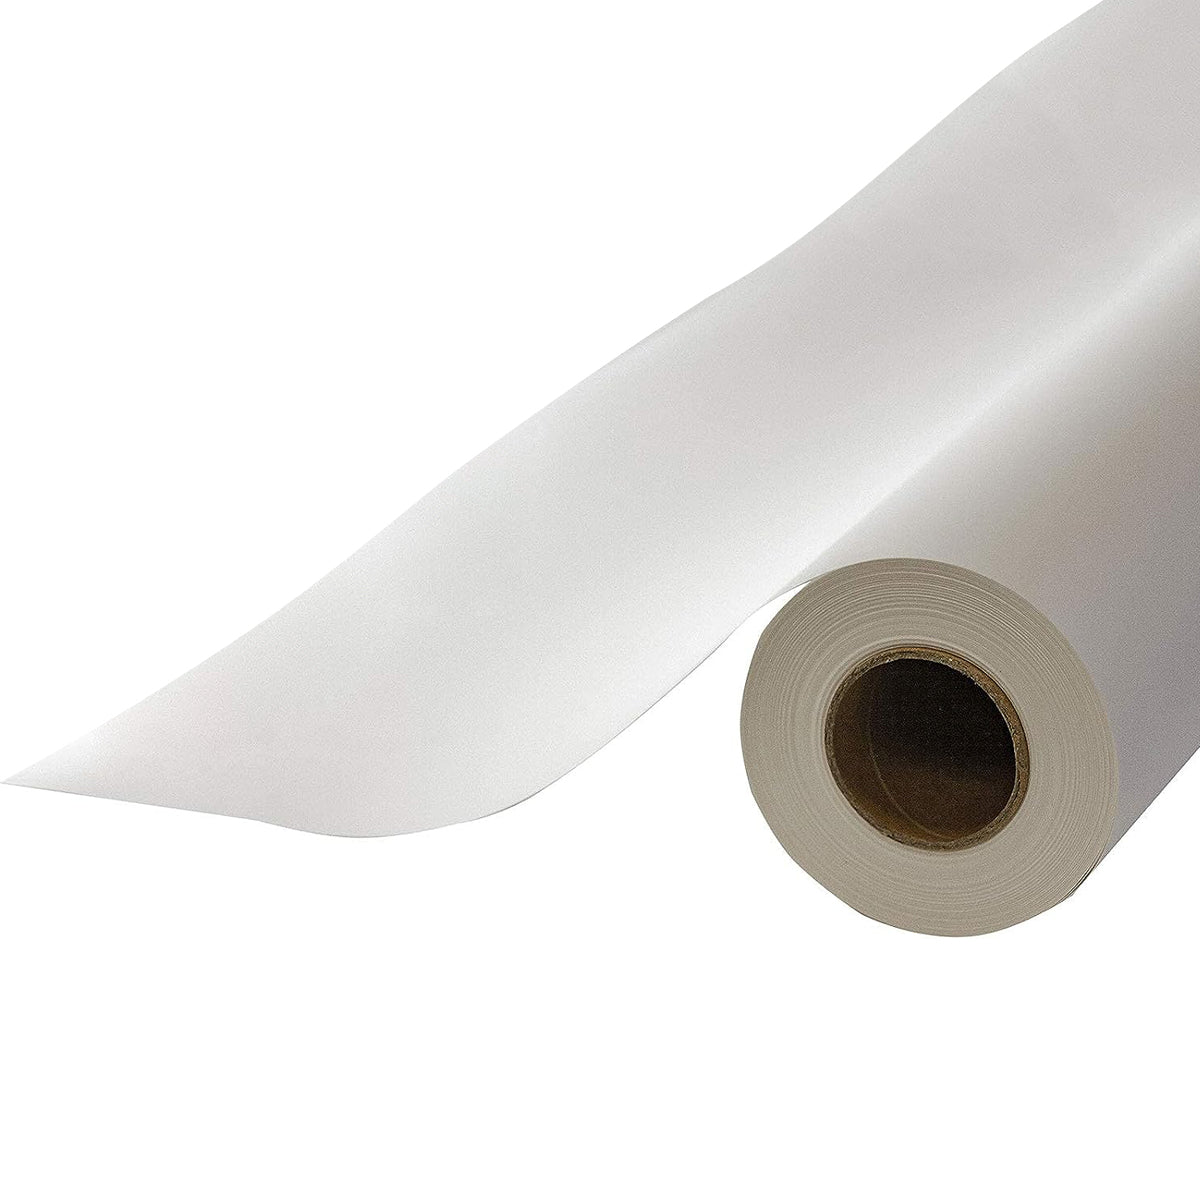 FastPlot Self Adhesive Vinyl - Waterproof 4mil - 24inch x 60ft Roll - 2Inch Core